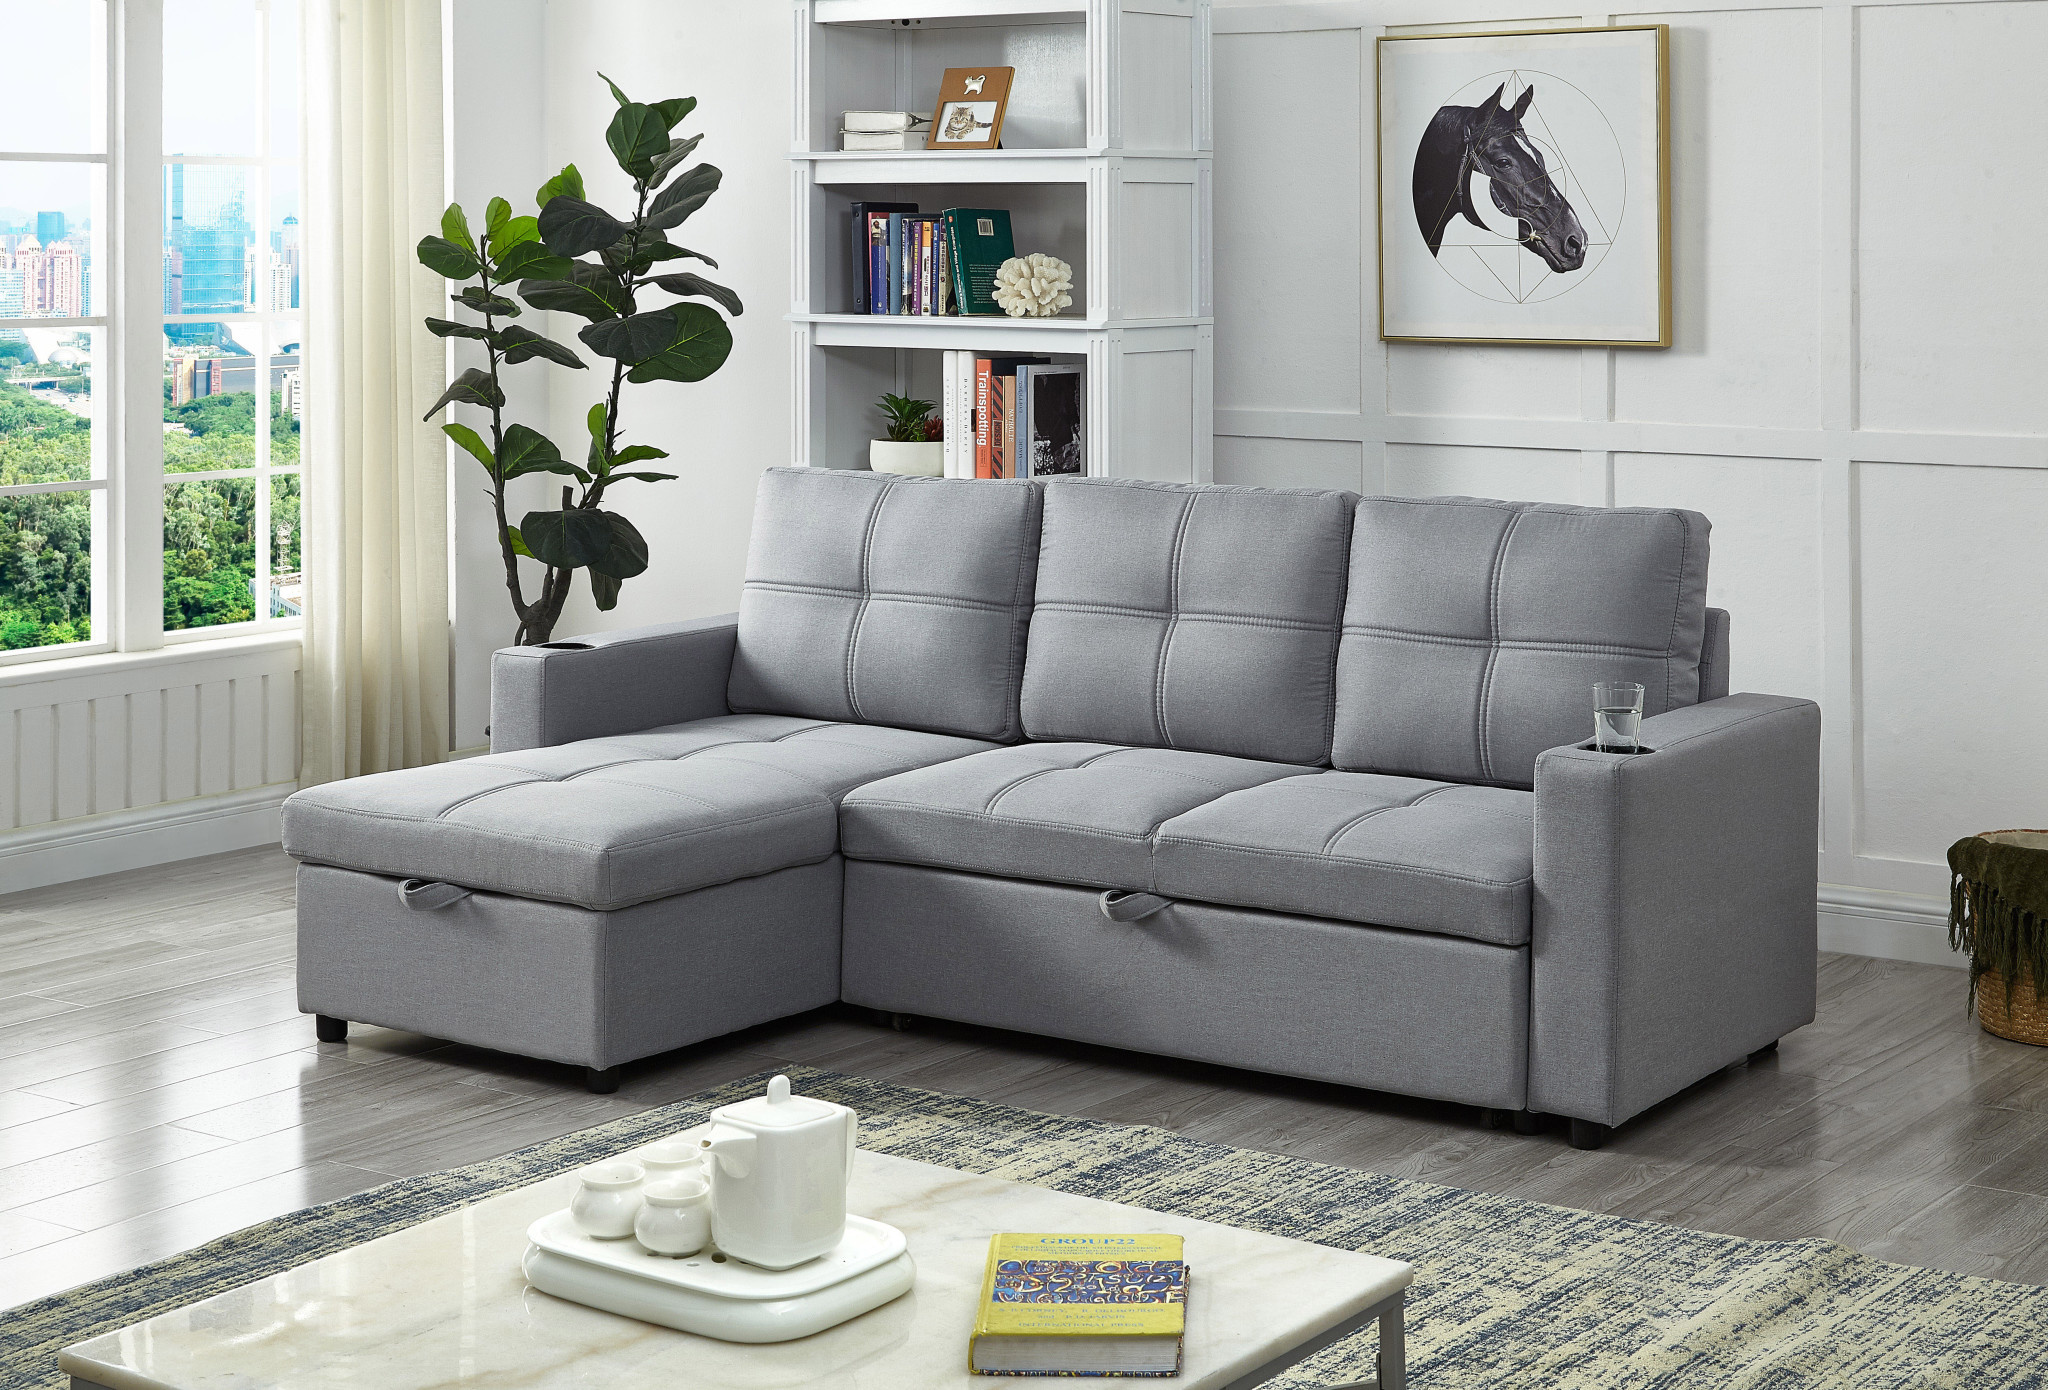 ebay sectional sofa bed